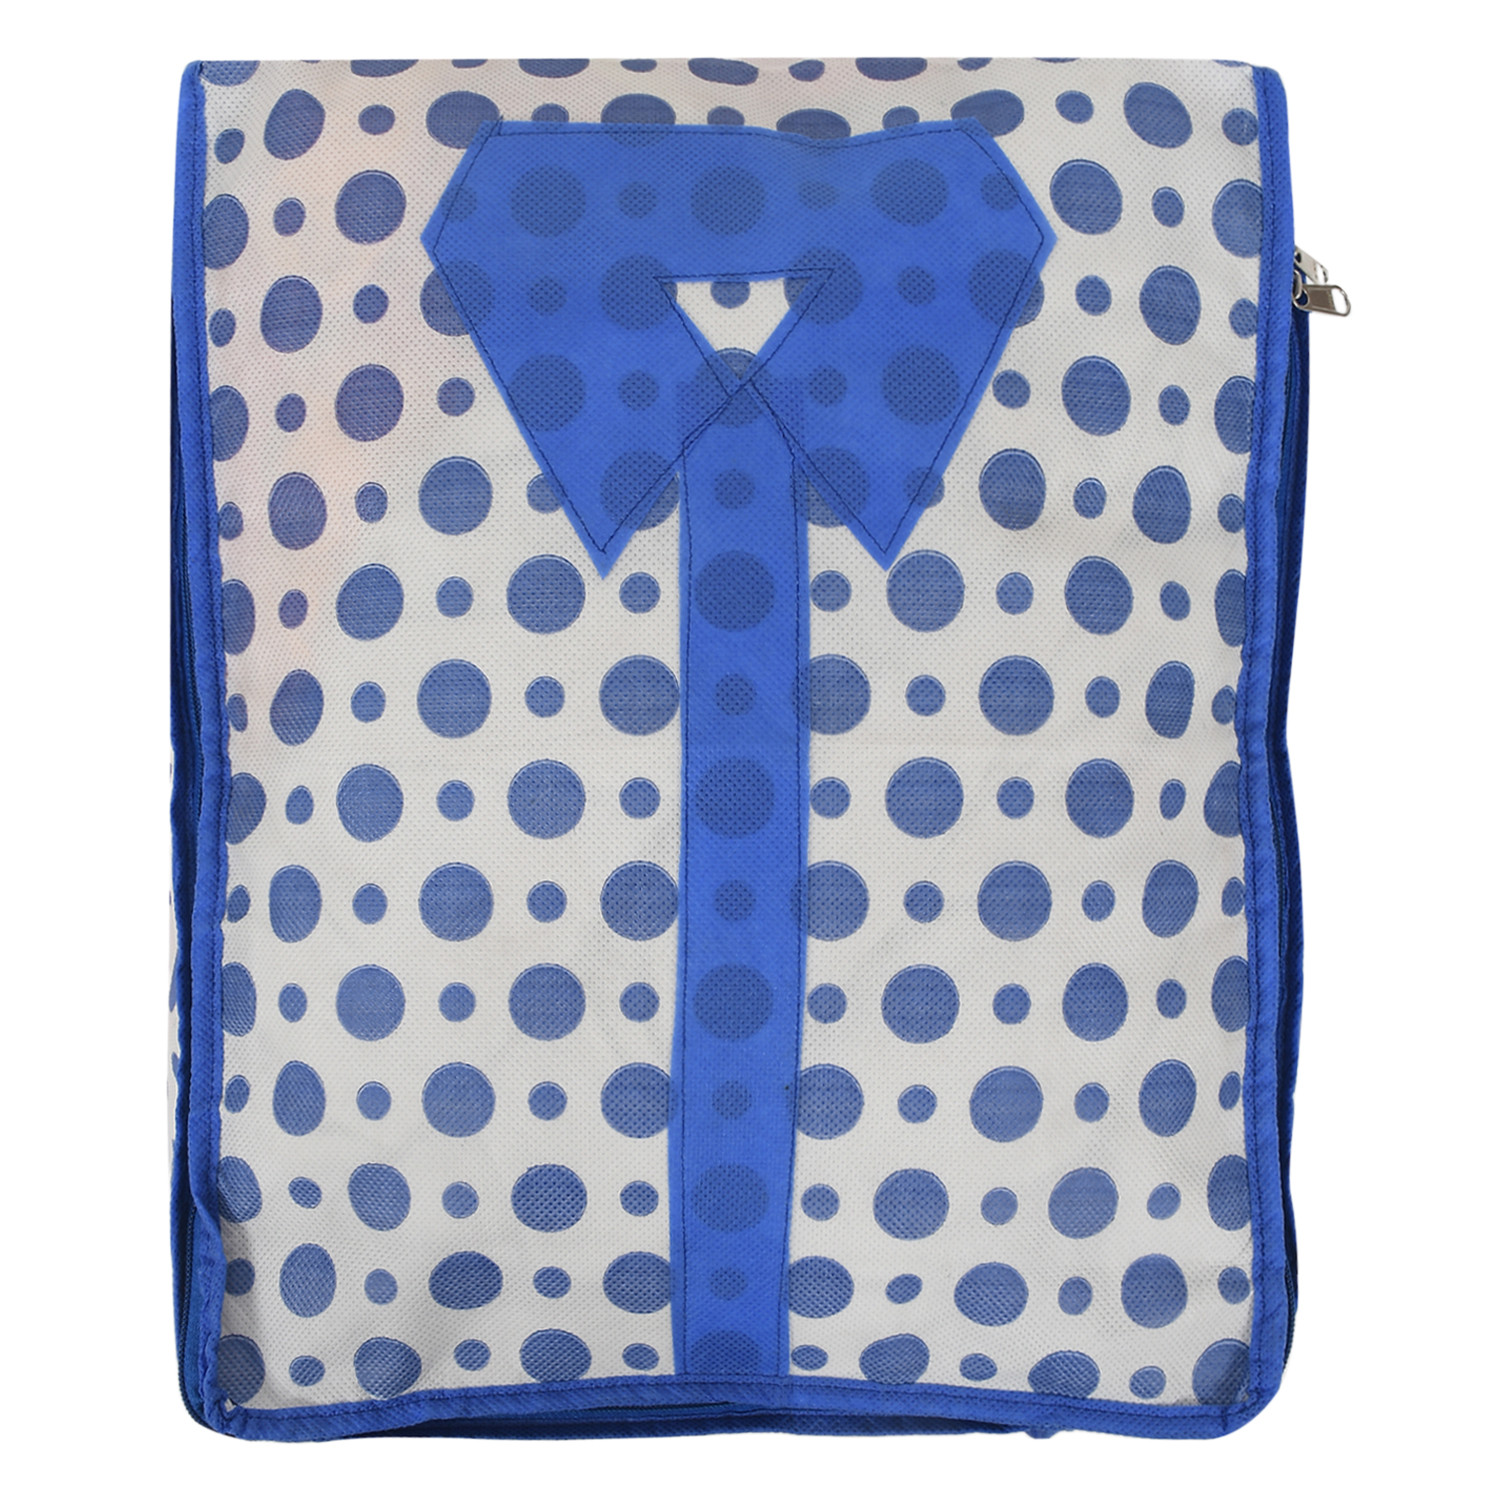 Kuber Industries Dot Print Non-Woven Shirt Cover/Clothing Organizer/Wardrobe Organizer For Home, Traveling (Blue) 54KM4177